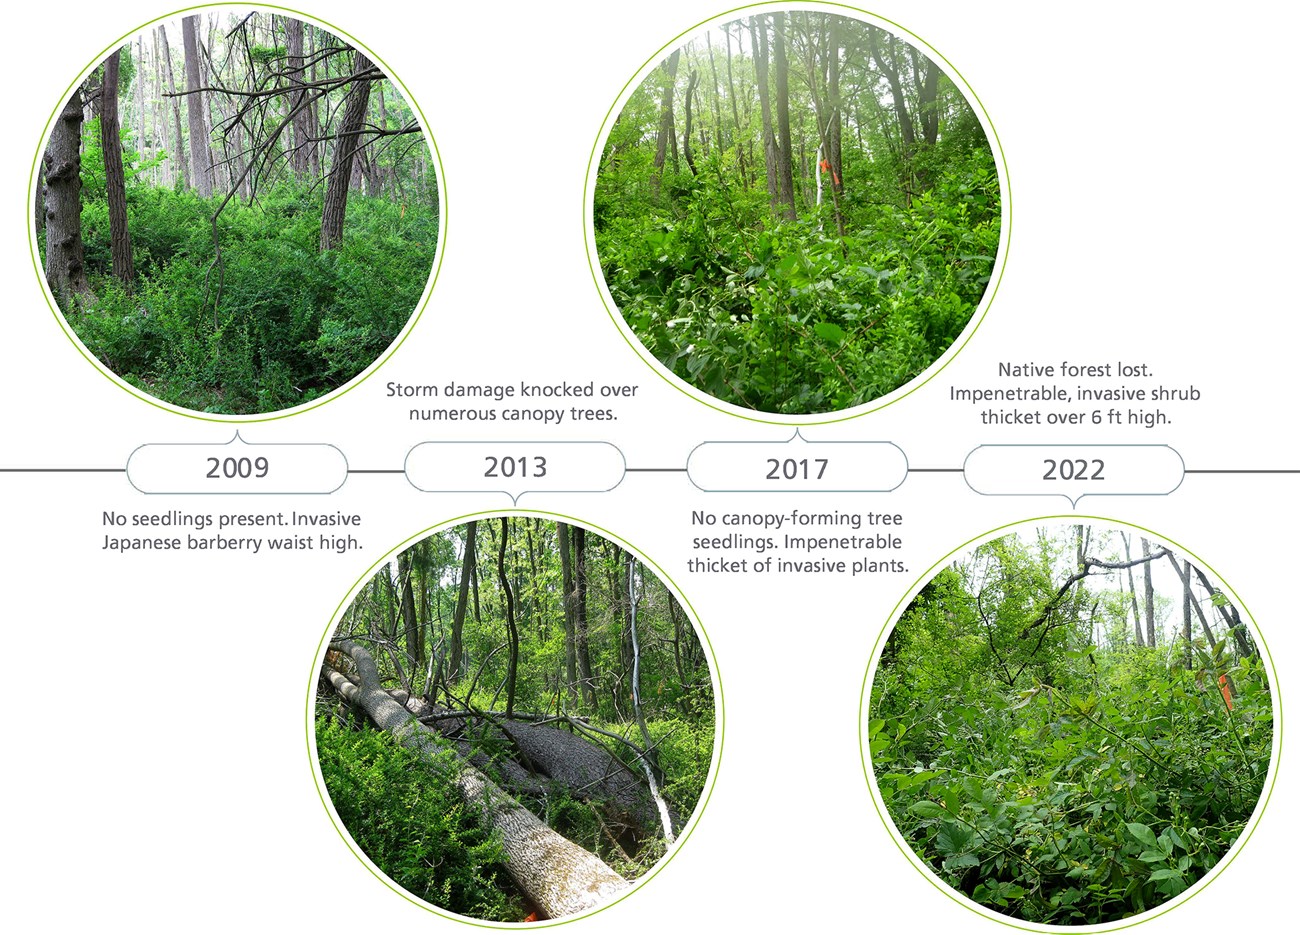 a series of four images showing a forest plot in 2009, 2013, 2017, and 2022. Images show the progression of invasive plants